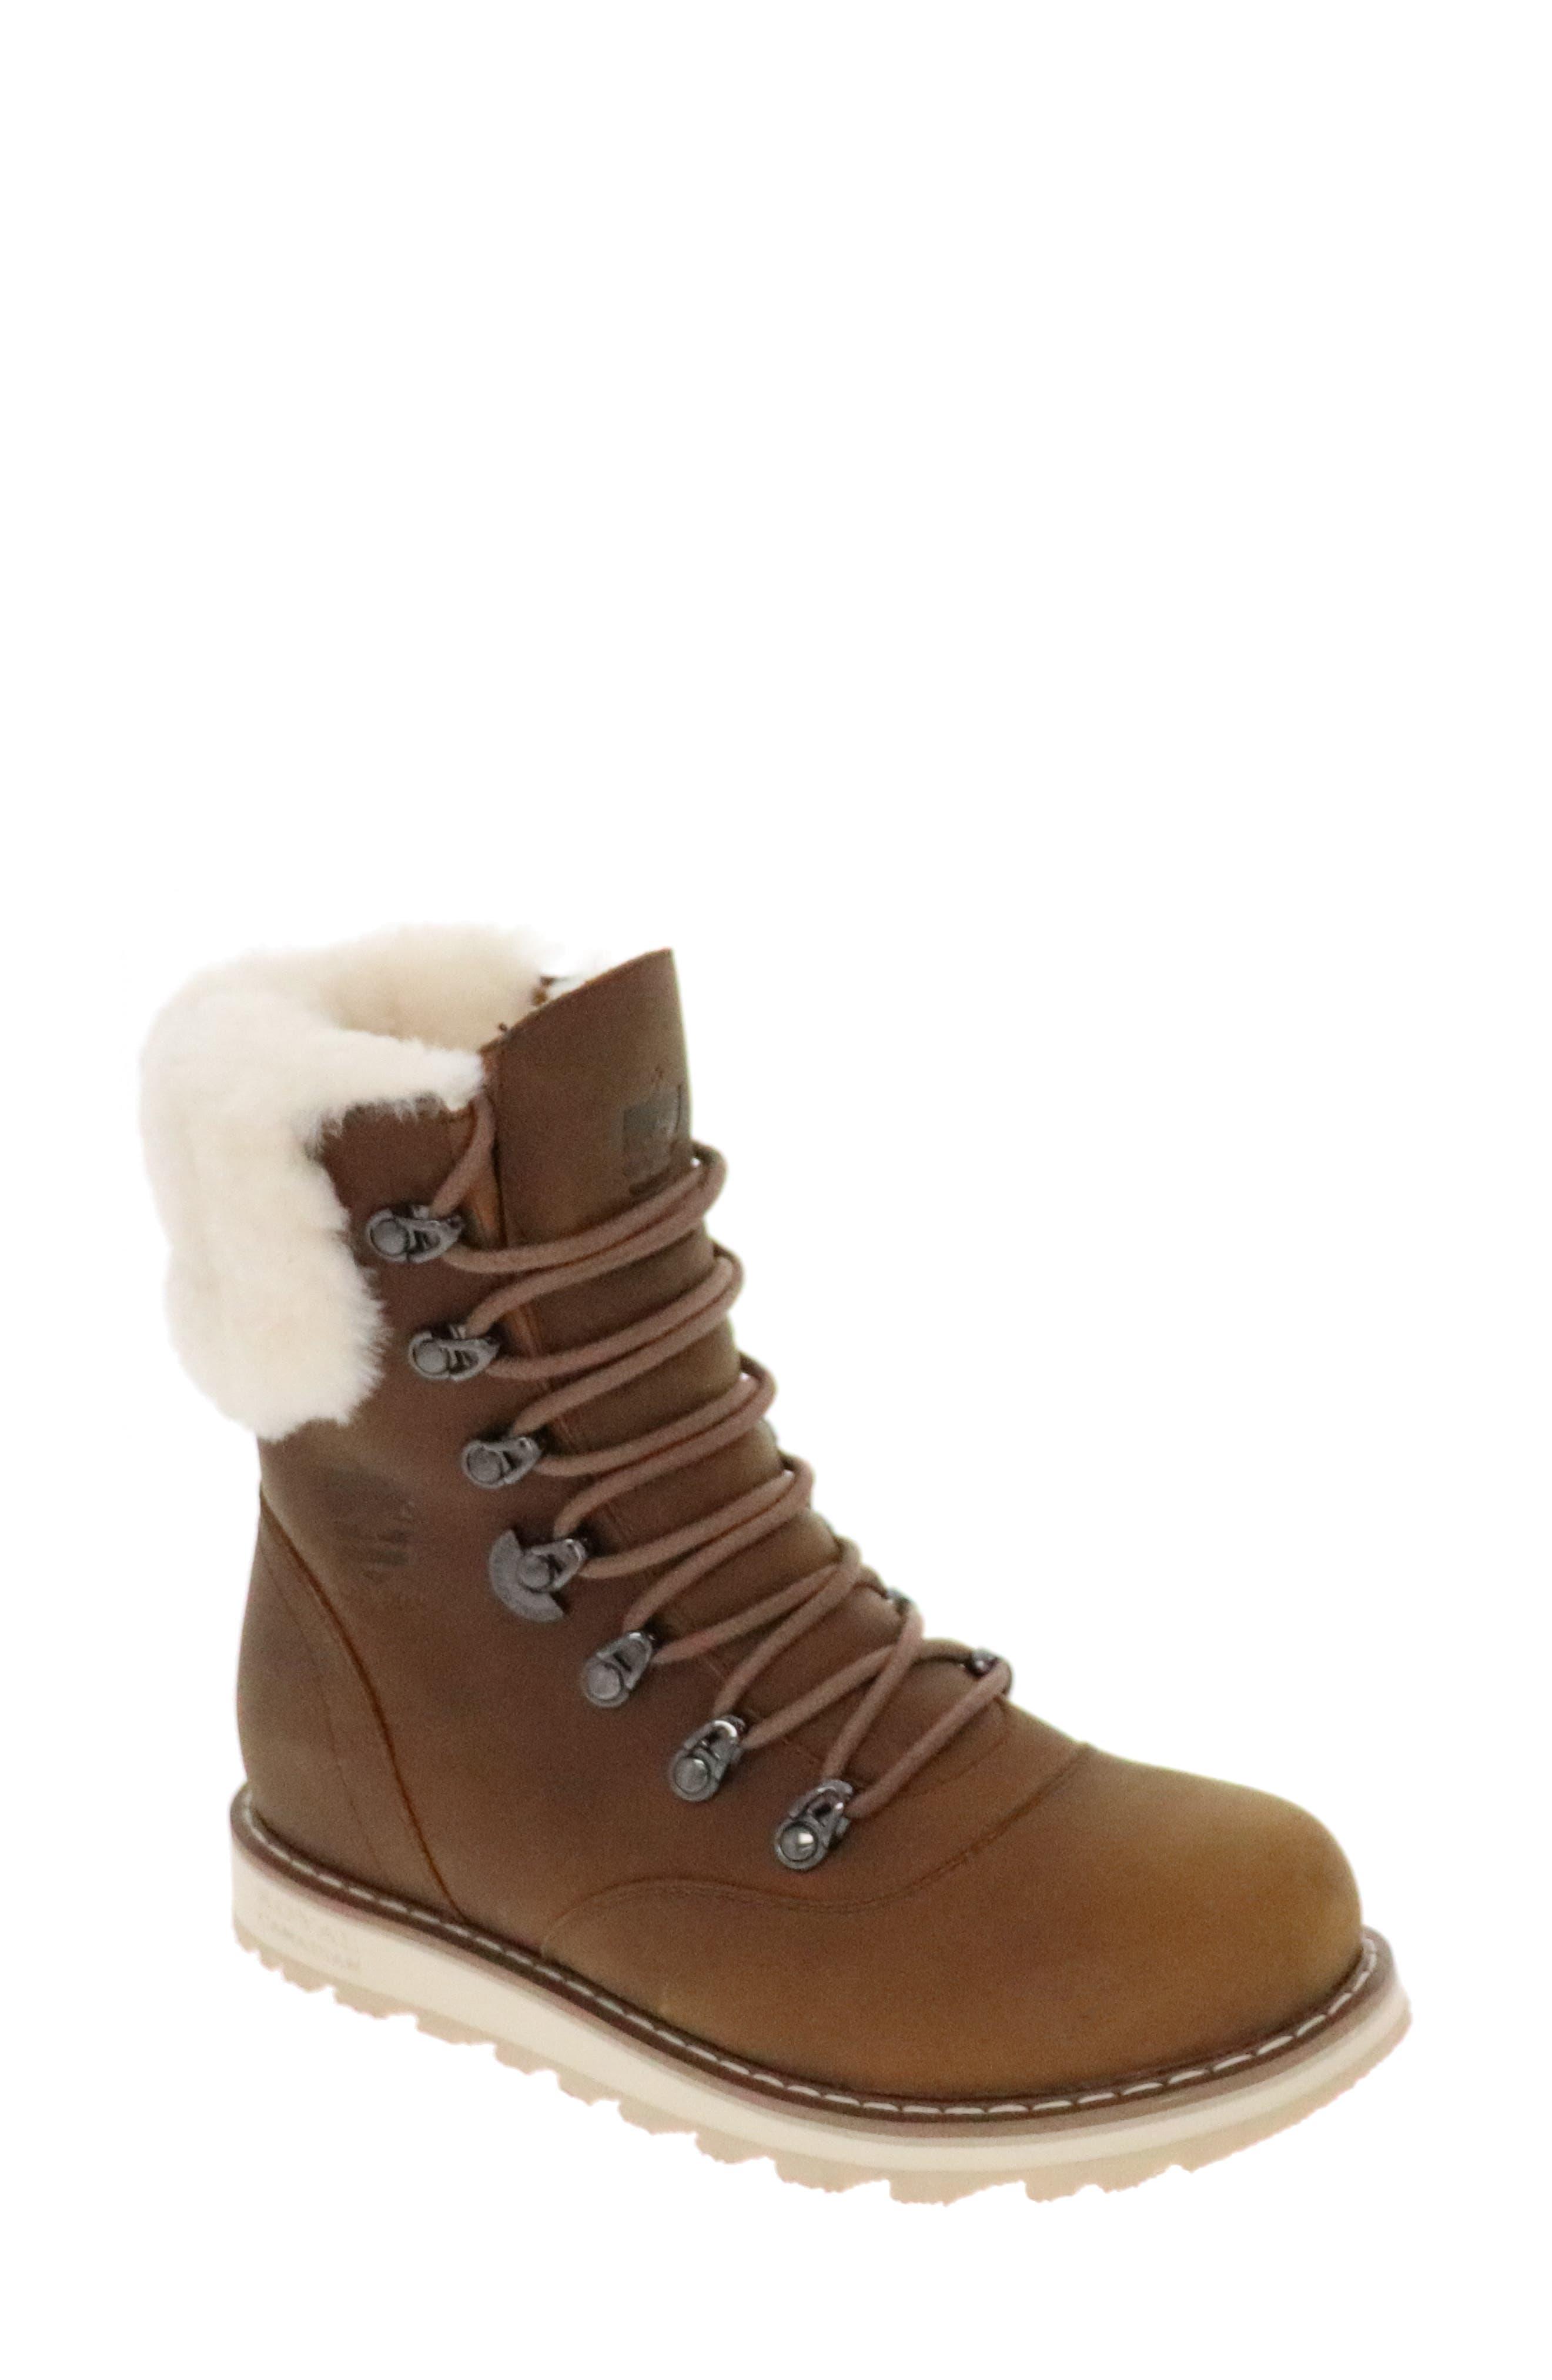 Royal Canadian Cambridge Waterproof Boot With Genuine Shearling Trim in ...